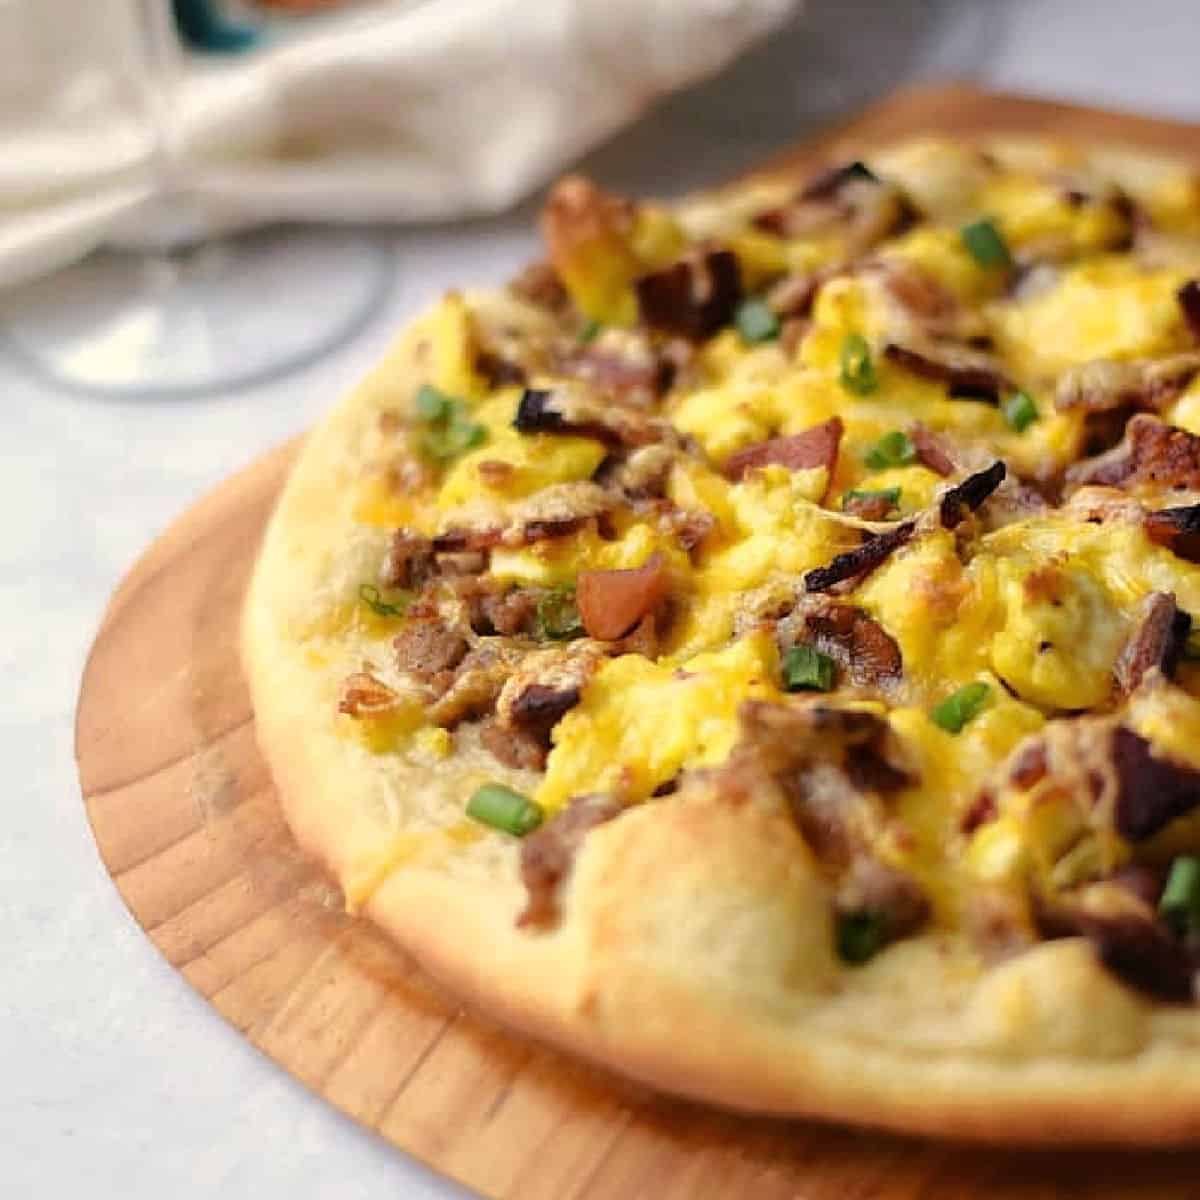 Pizza crust topped with scrambled eggs, bacon, sausage gravy and melted cheese.